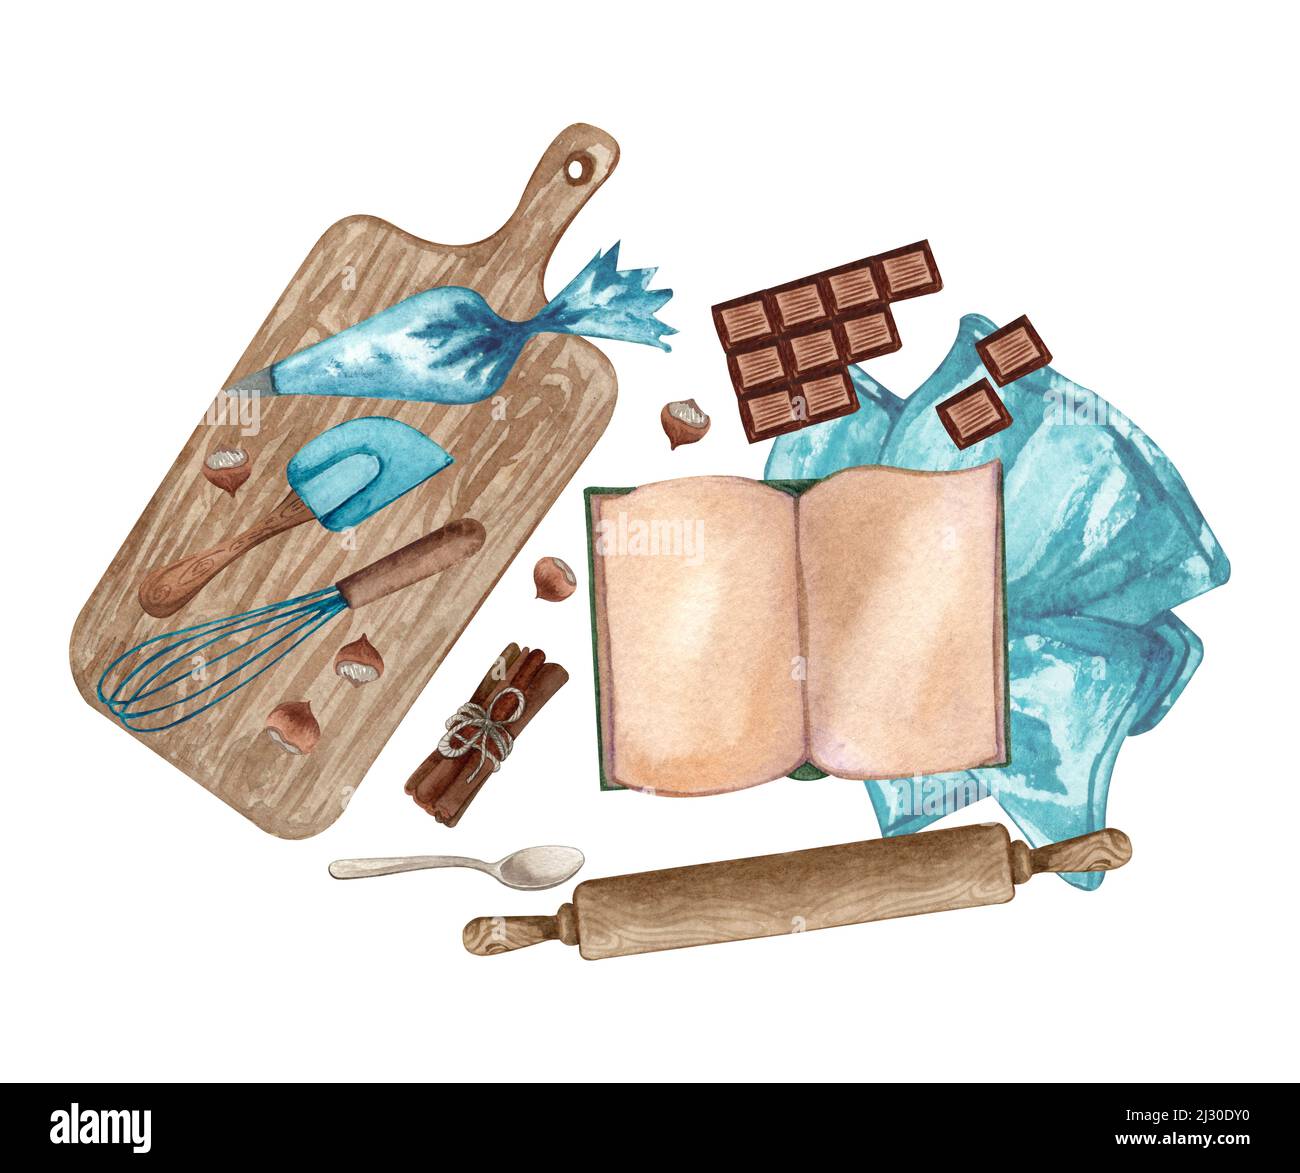 Baking watercolor illustration with kitchen utensils, chopping board, spoon, rolling pin, chocolate bar, whisk, nuts, recepie book on white background Stock Photo